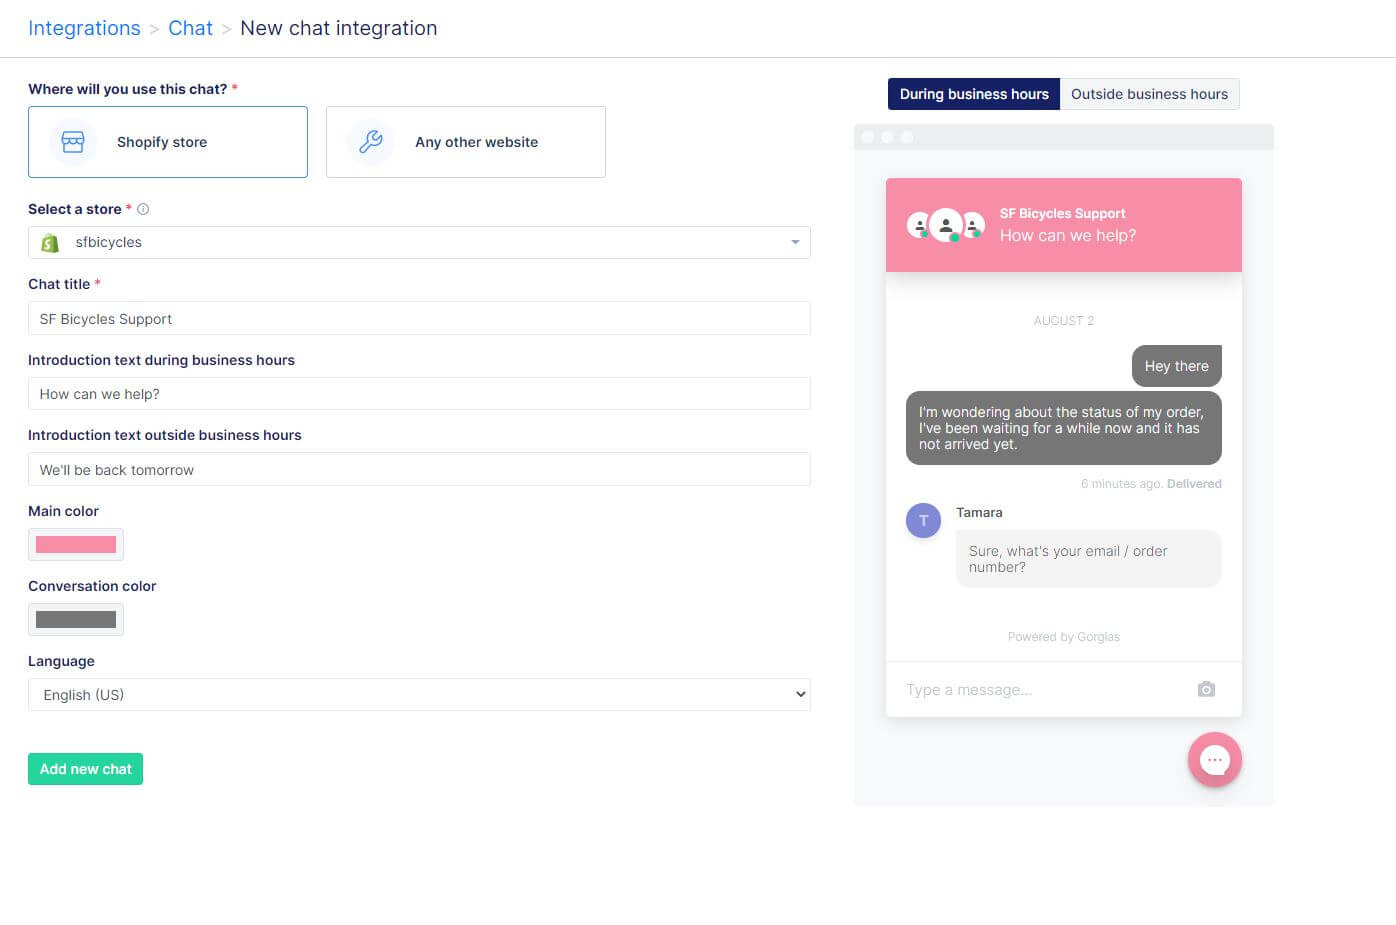 Gorgias live chat is integrated via your CMS
